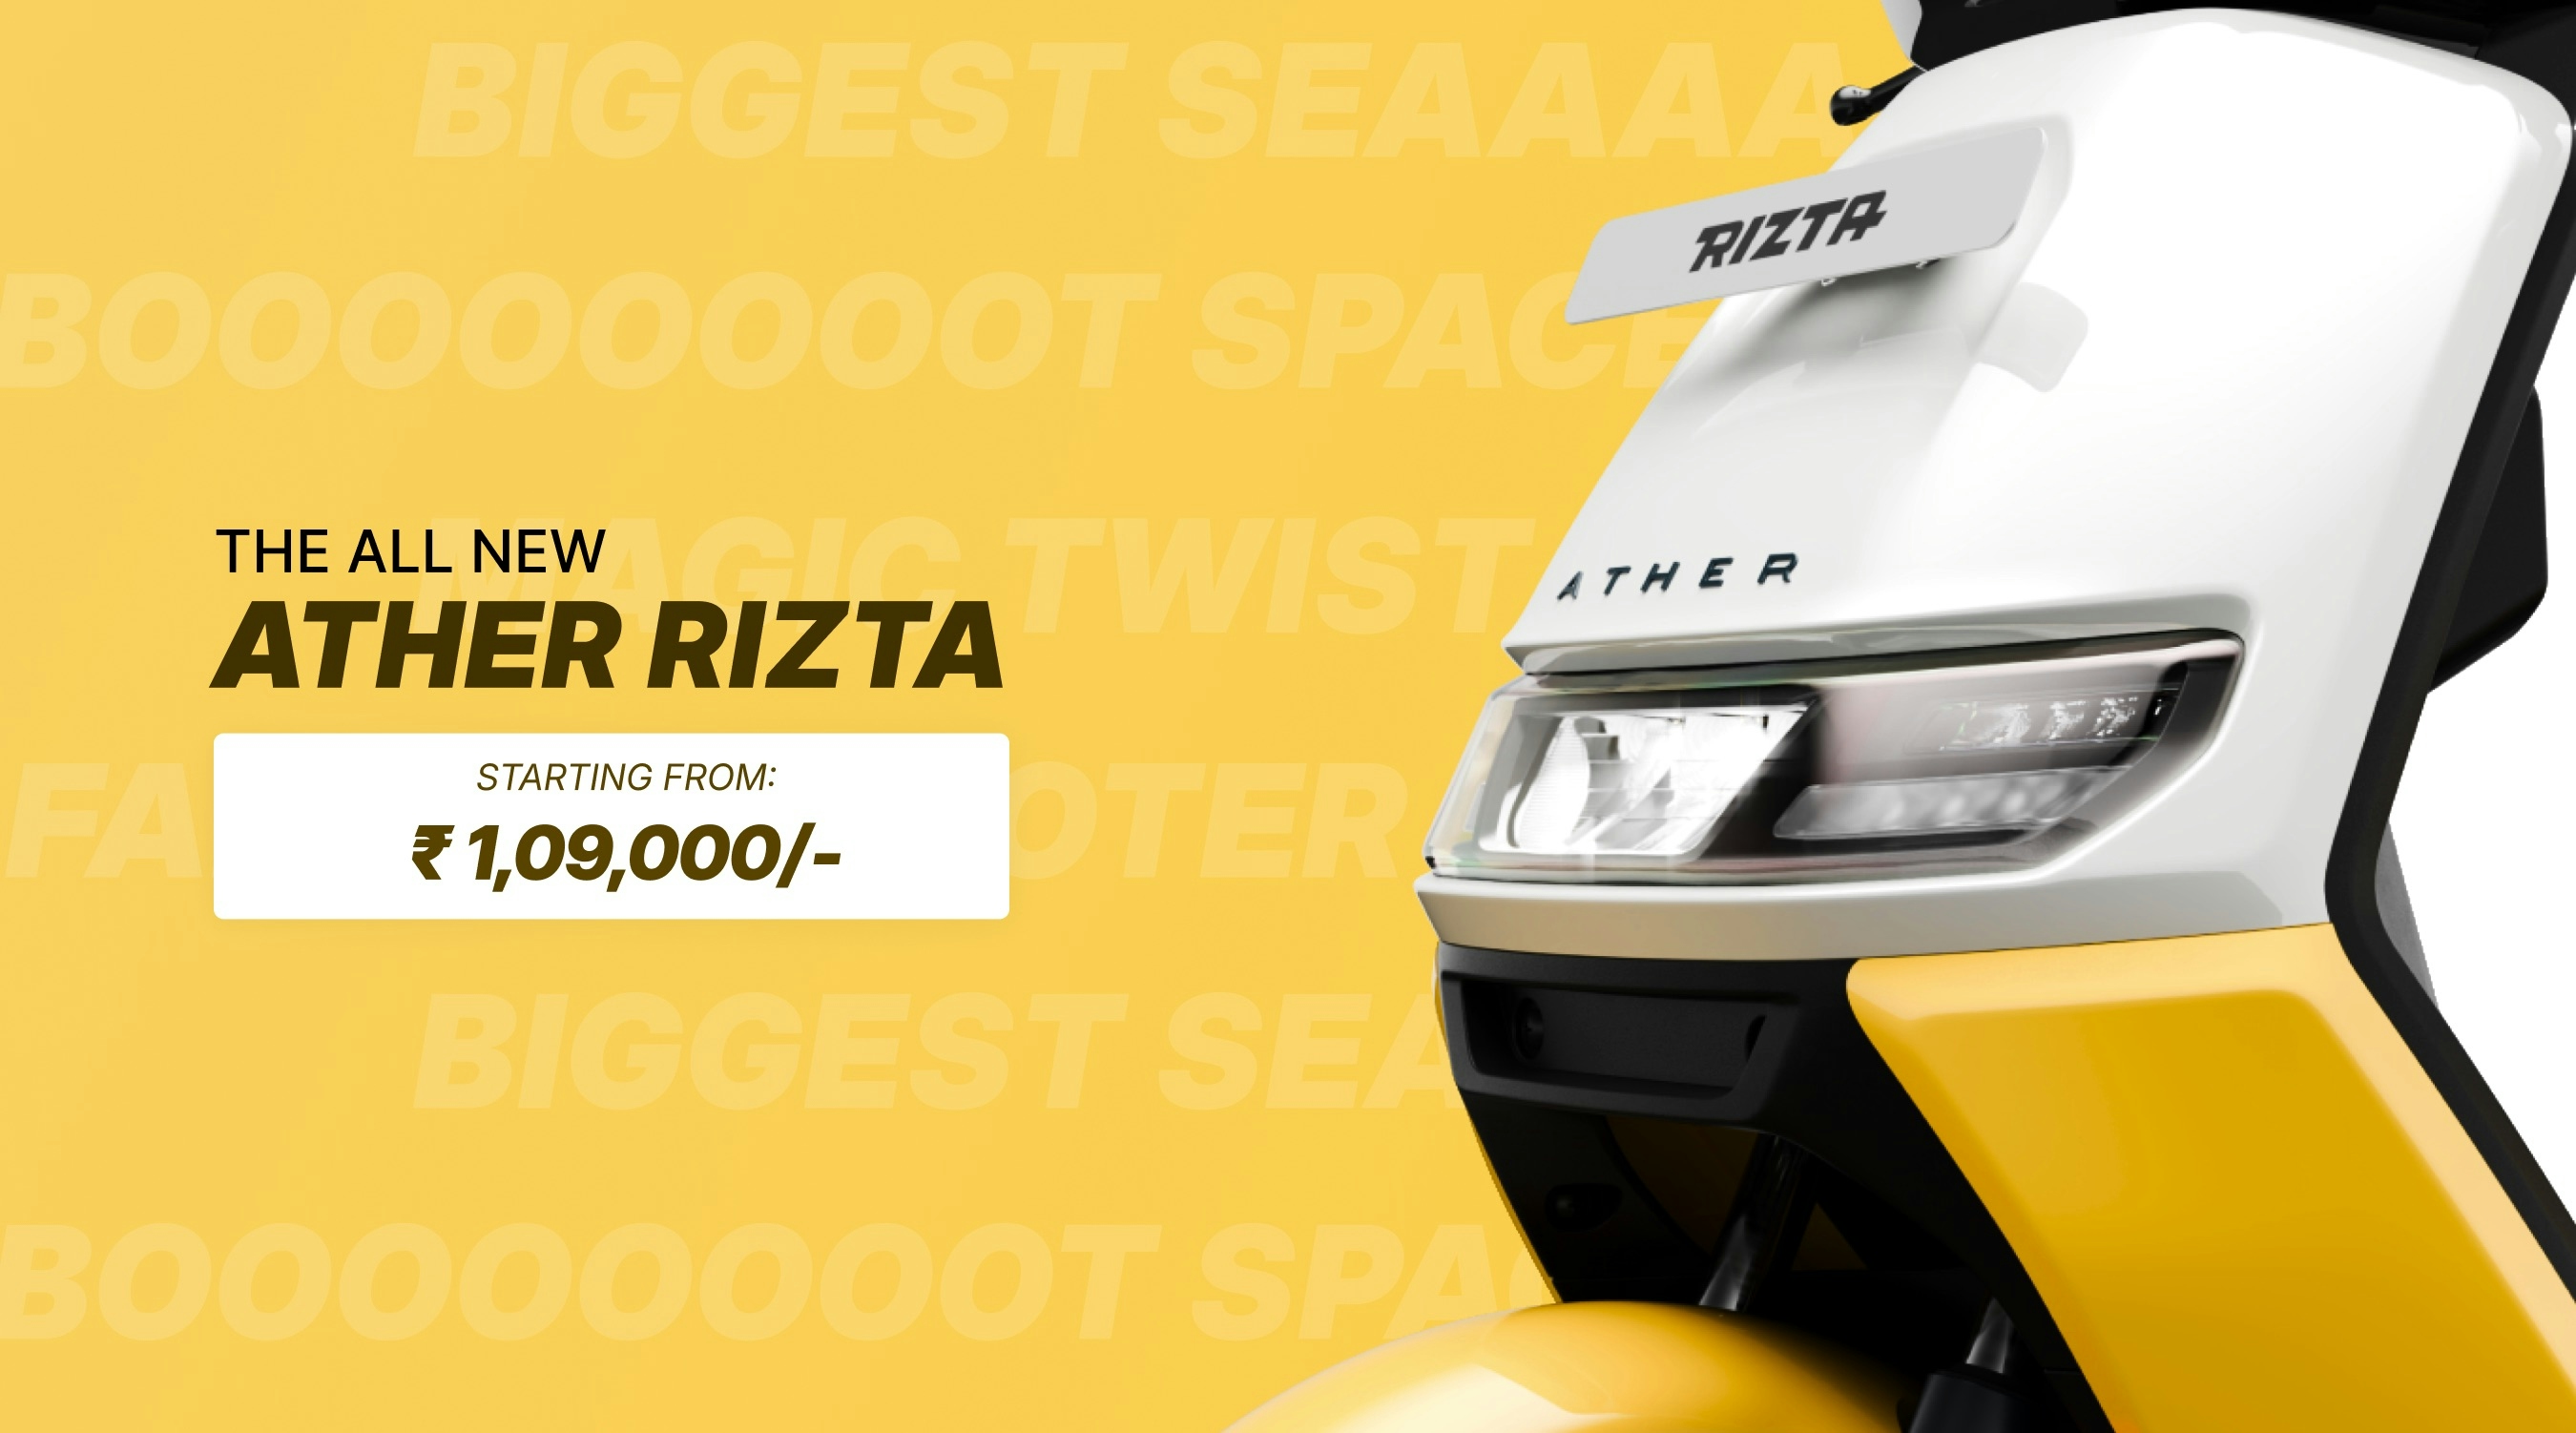 the All new Ather Rizta